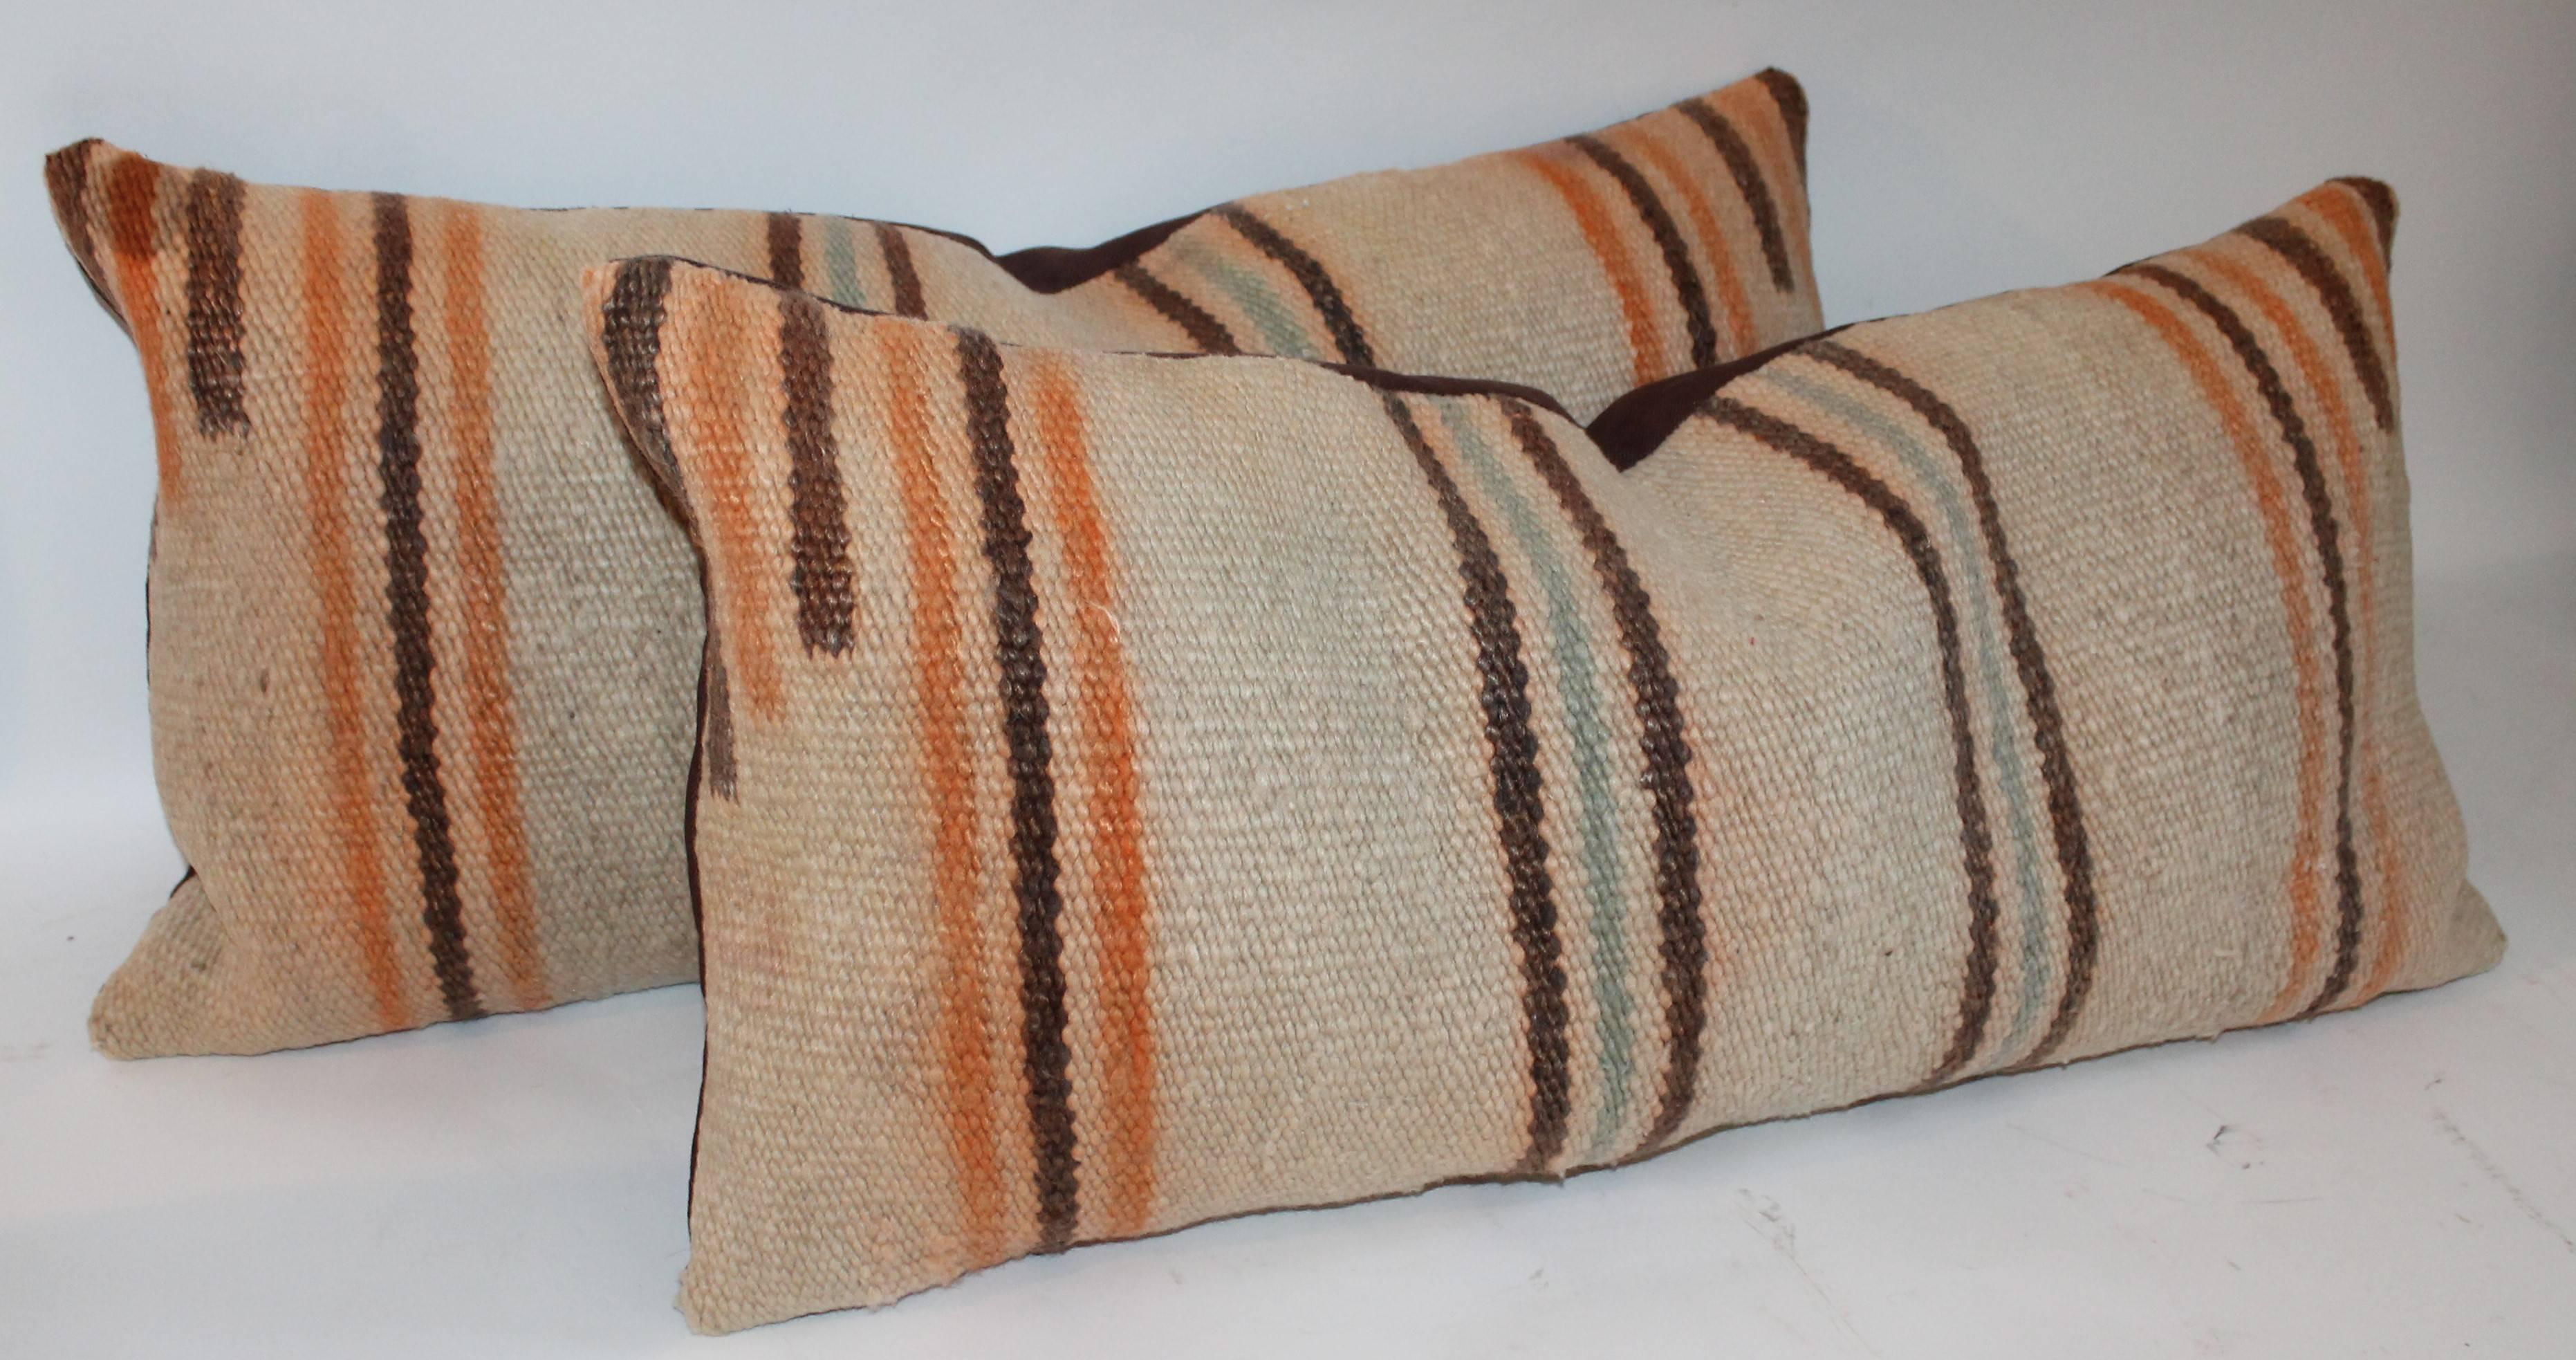 This pair of very early saddle blanket weaving pillows are in good condition with slight fade in a consistent way. The backing are in a brown cotton linen.